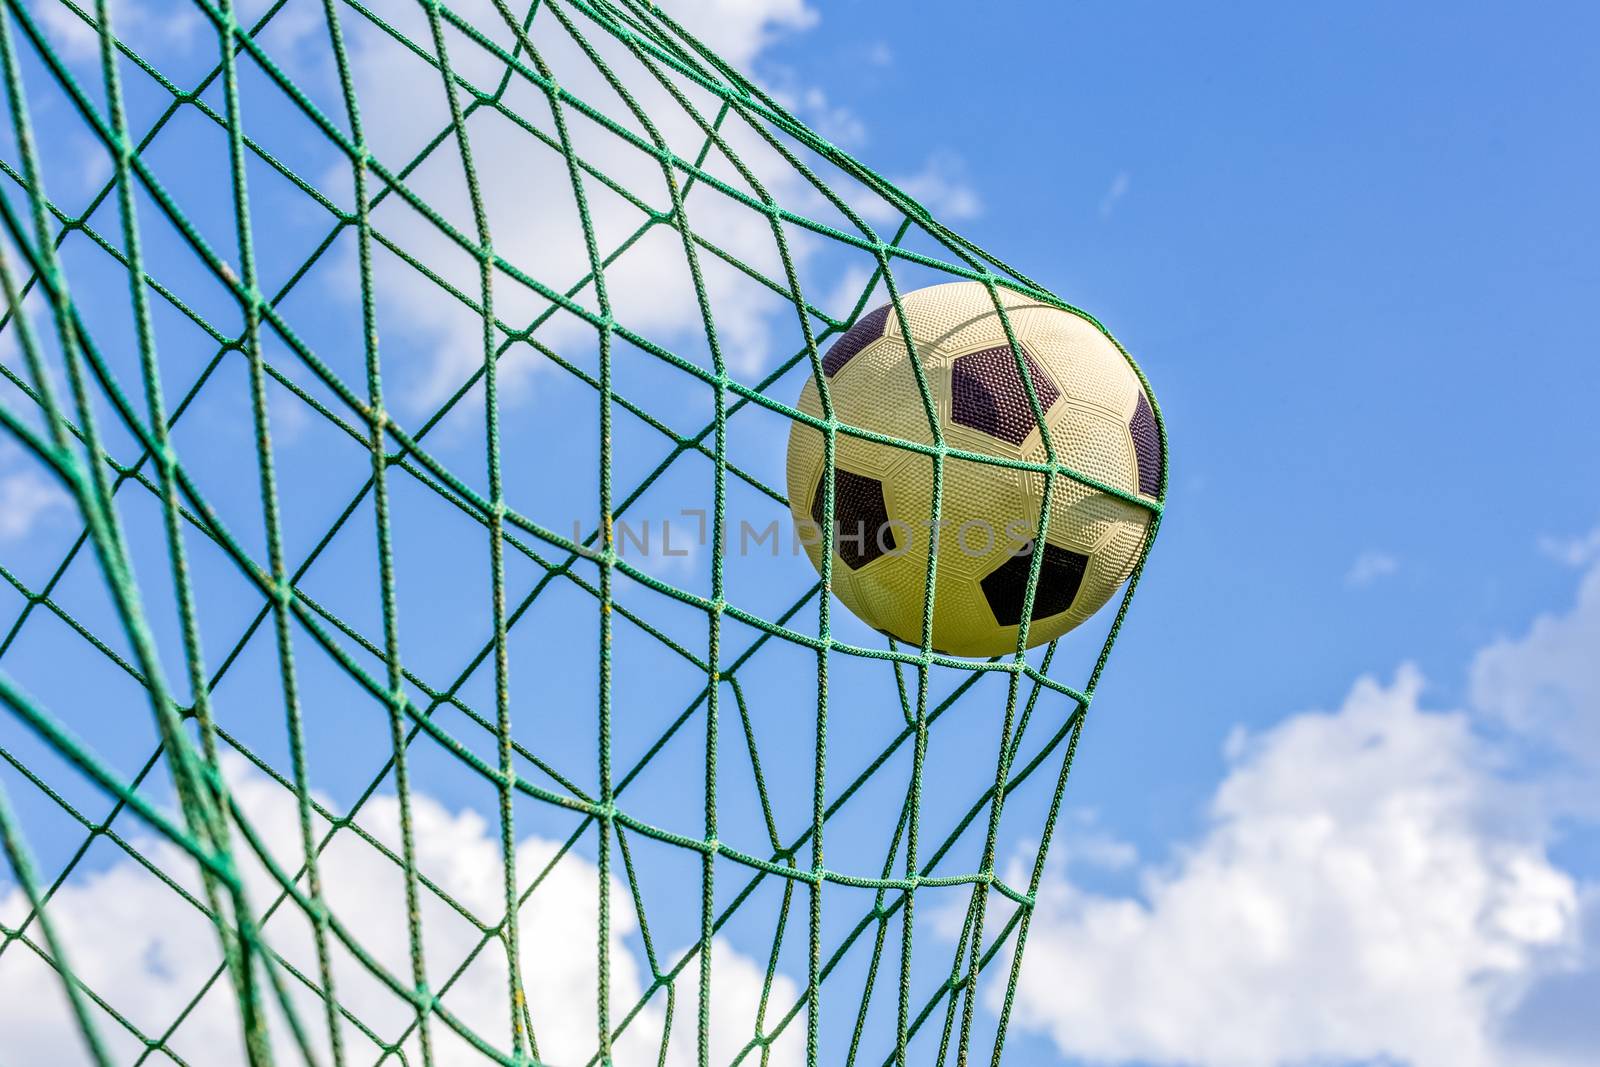 Black and white football shot in goal net in front of blue sky with white clouds